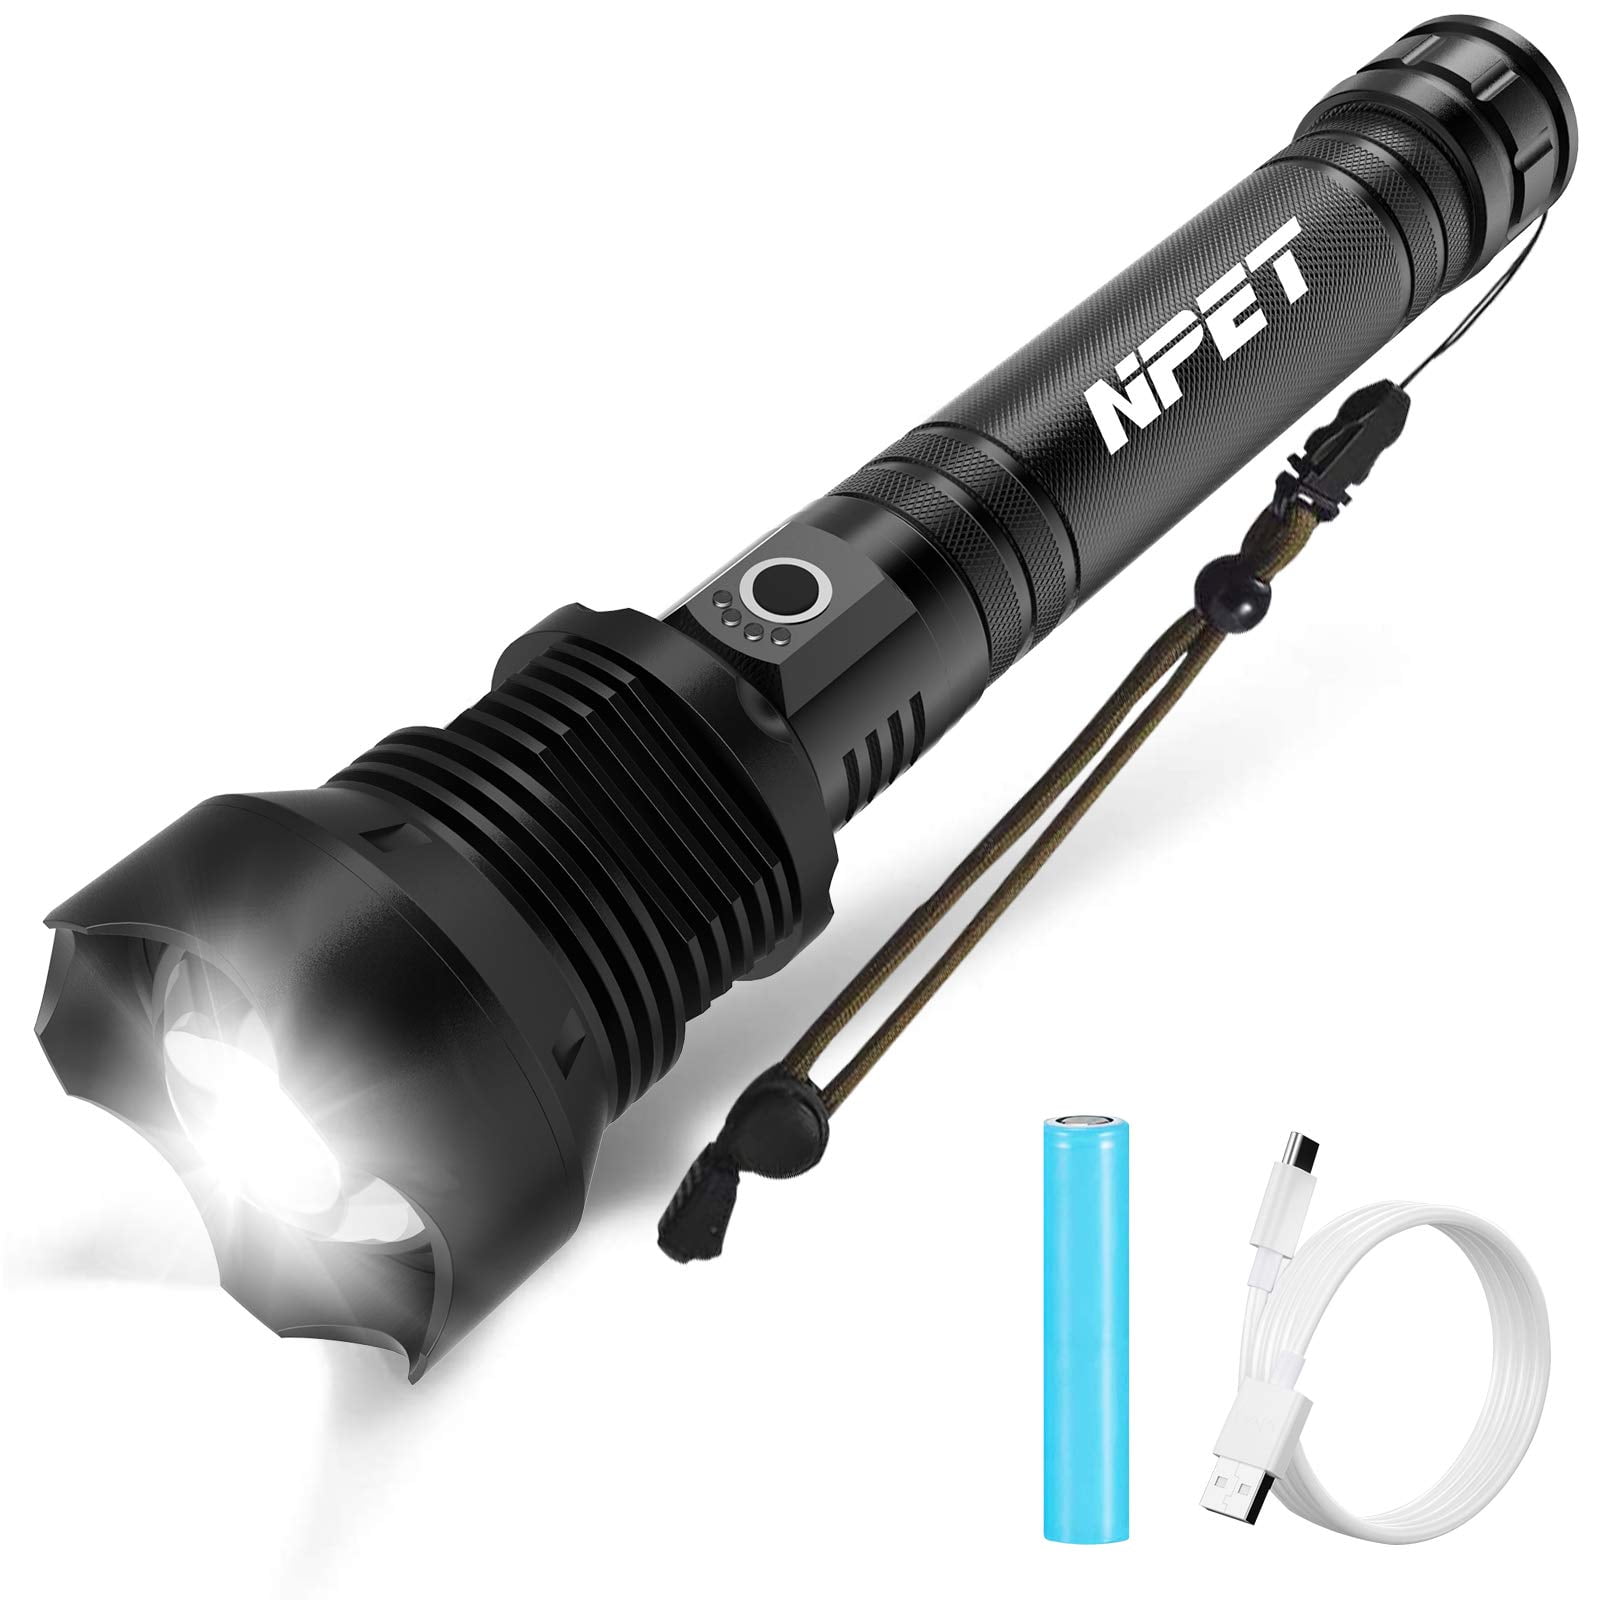 Details about   Tactical 350000LM Zoomable LED Flashlight Torch Lamp Camping & Charger 